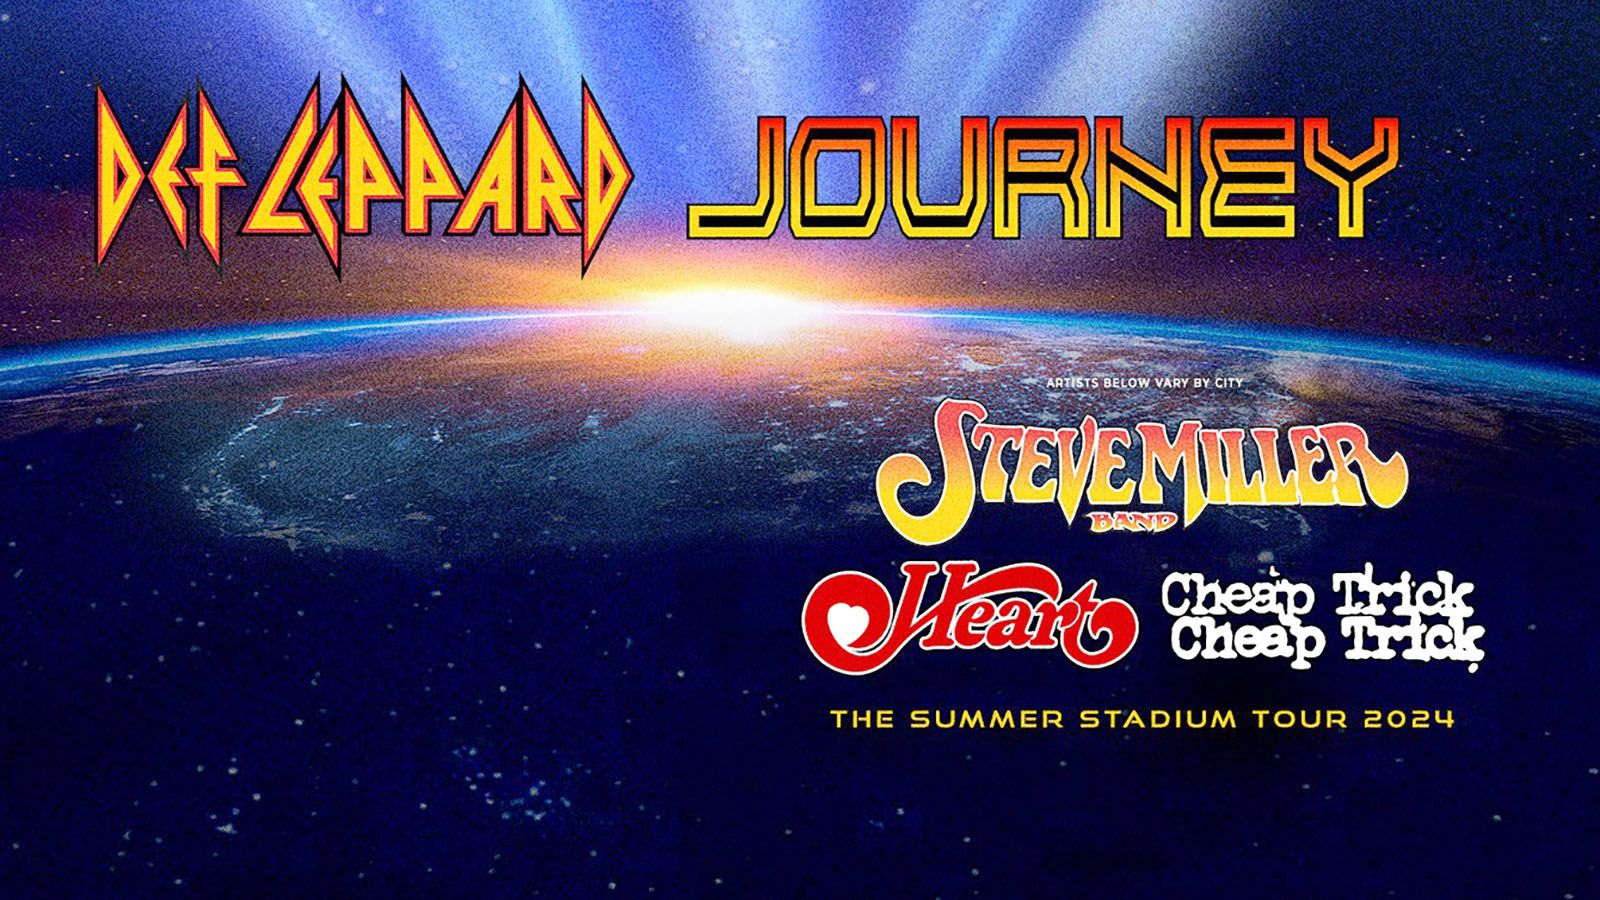 Def Leppard and Journey will embark on a co-headlining tour this summer.